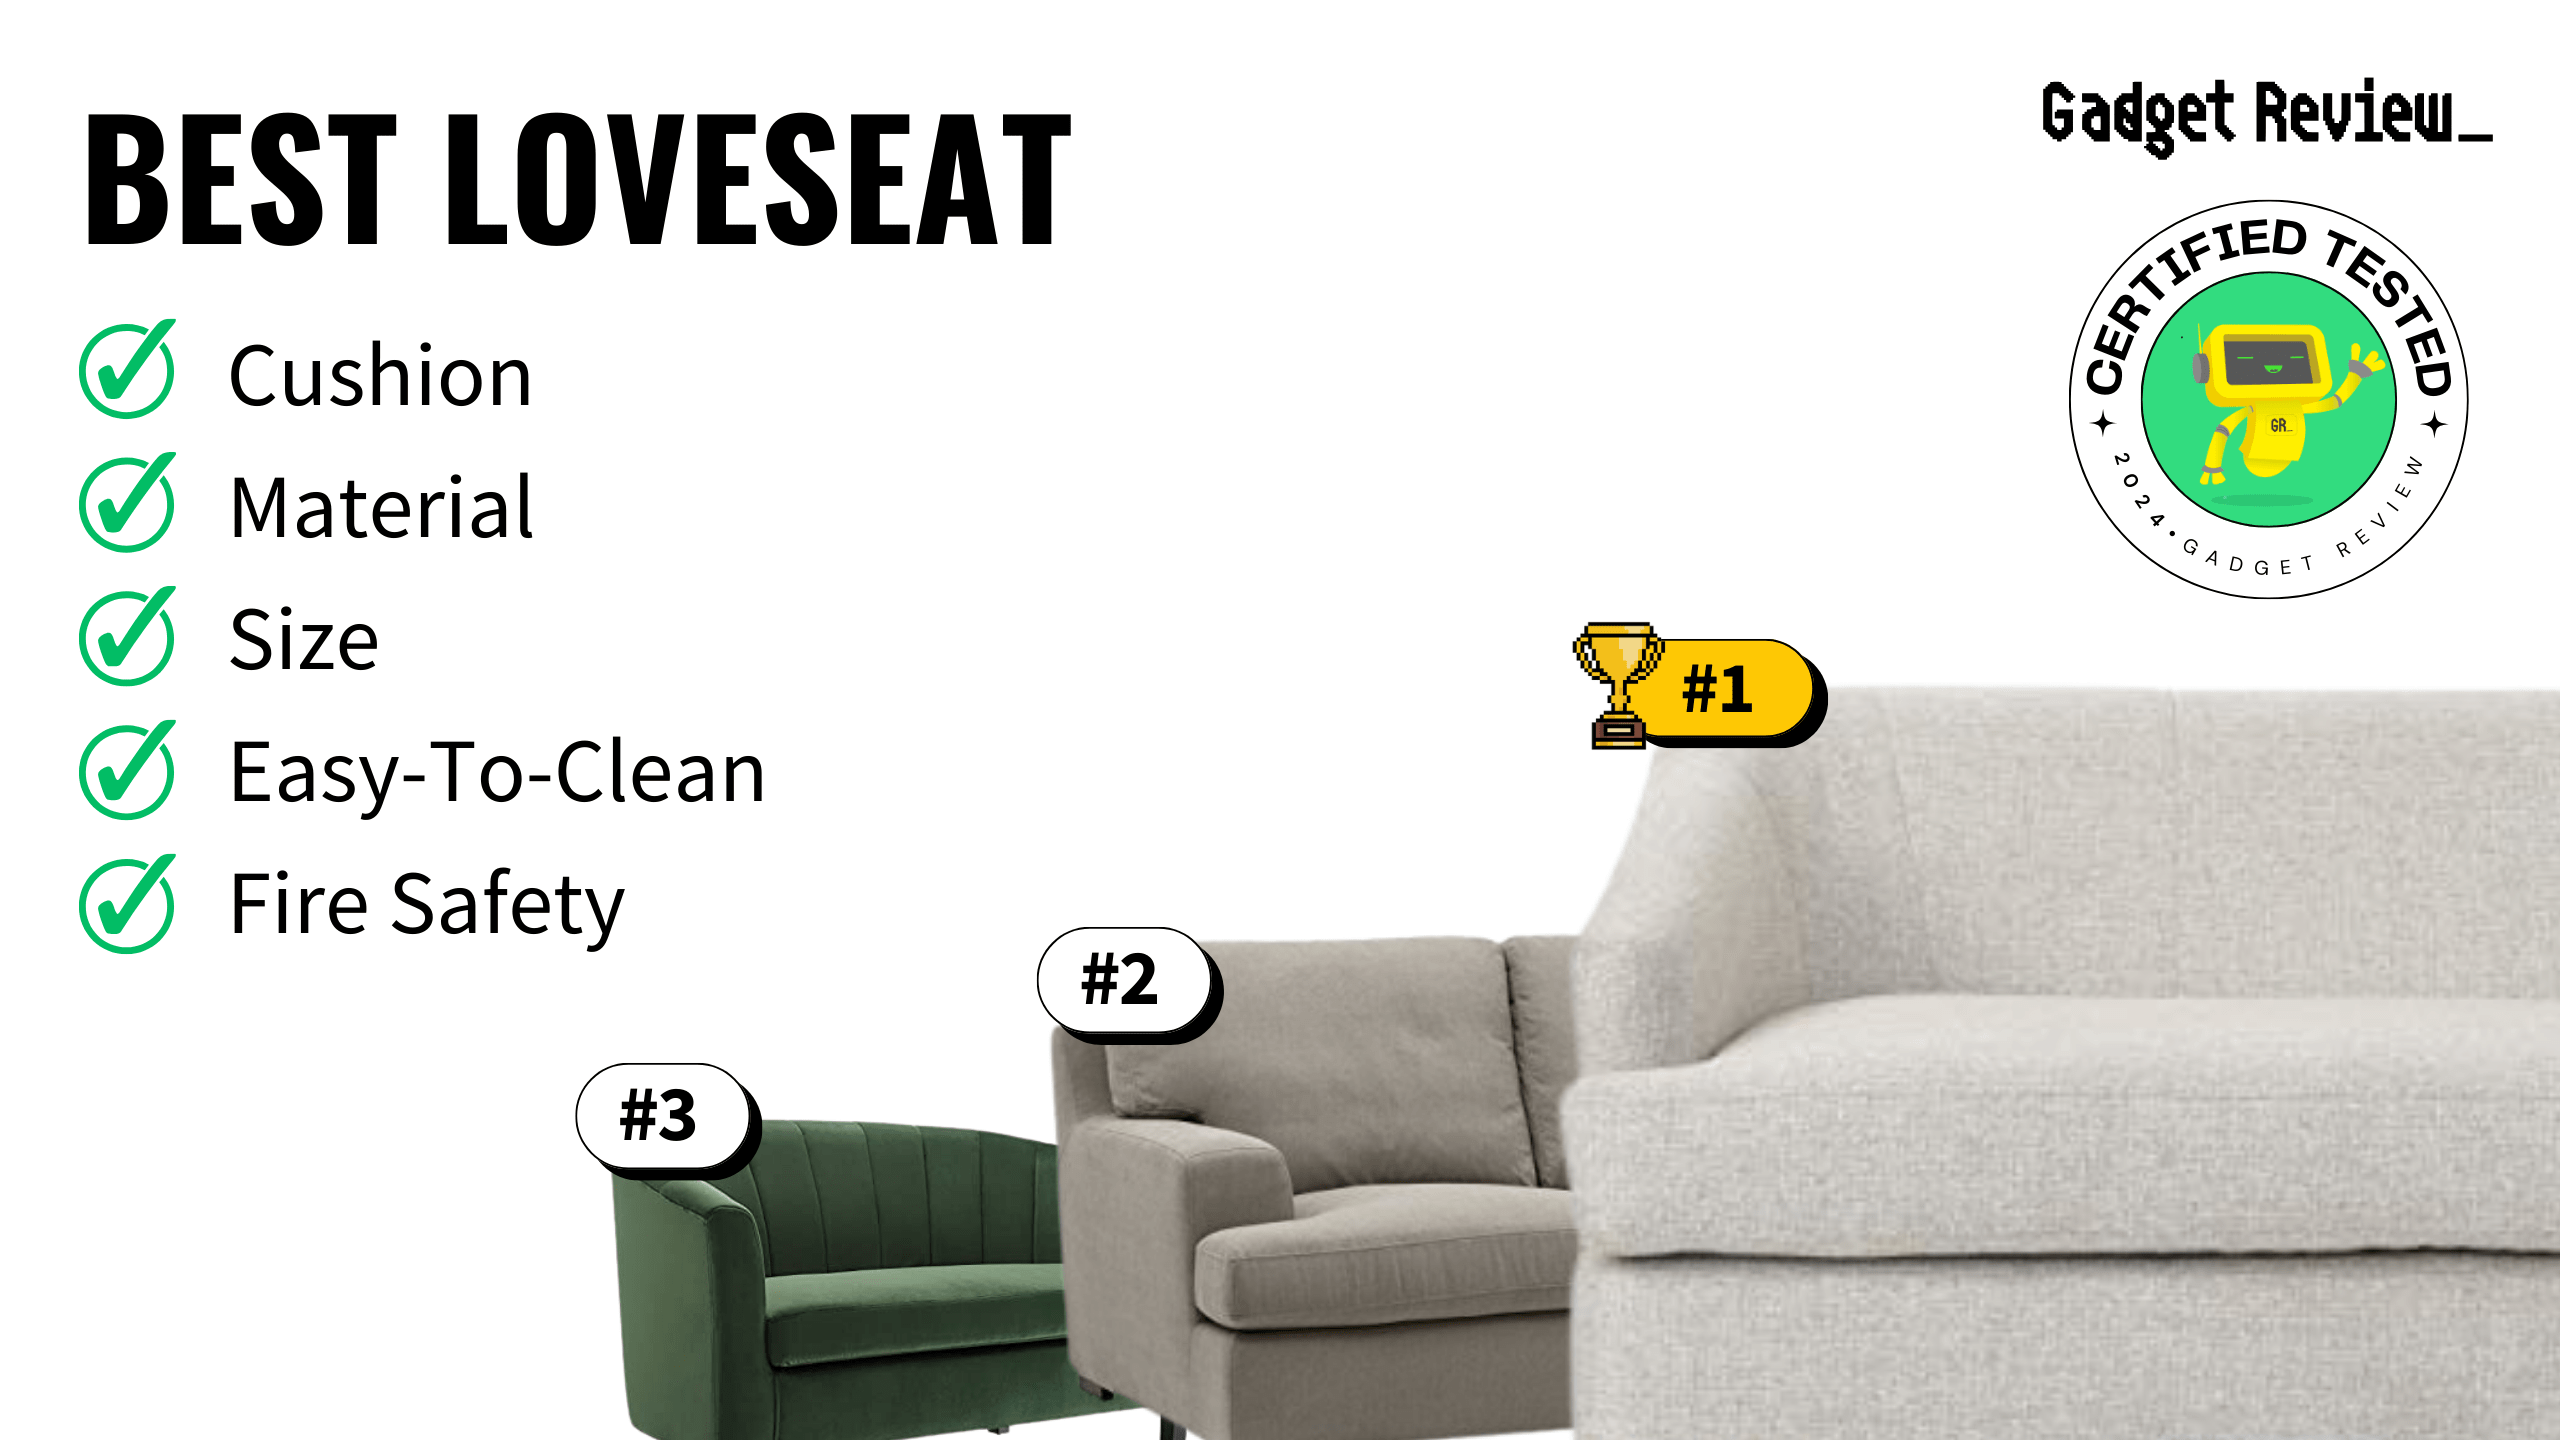 best loveseat guide that shows the top loveseat model